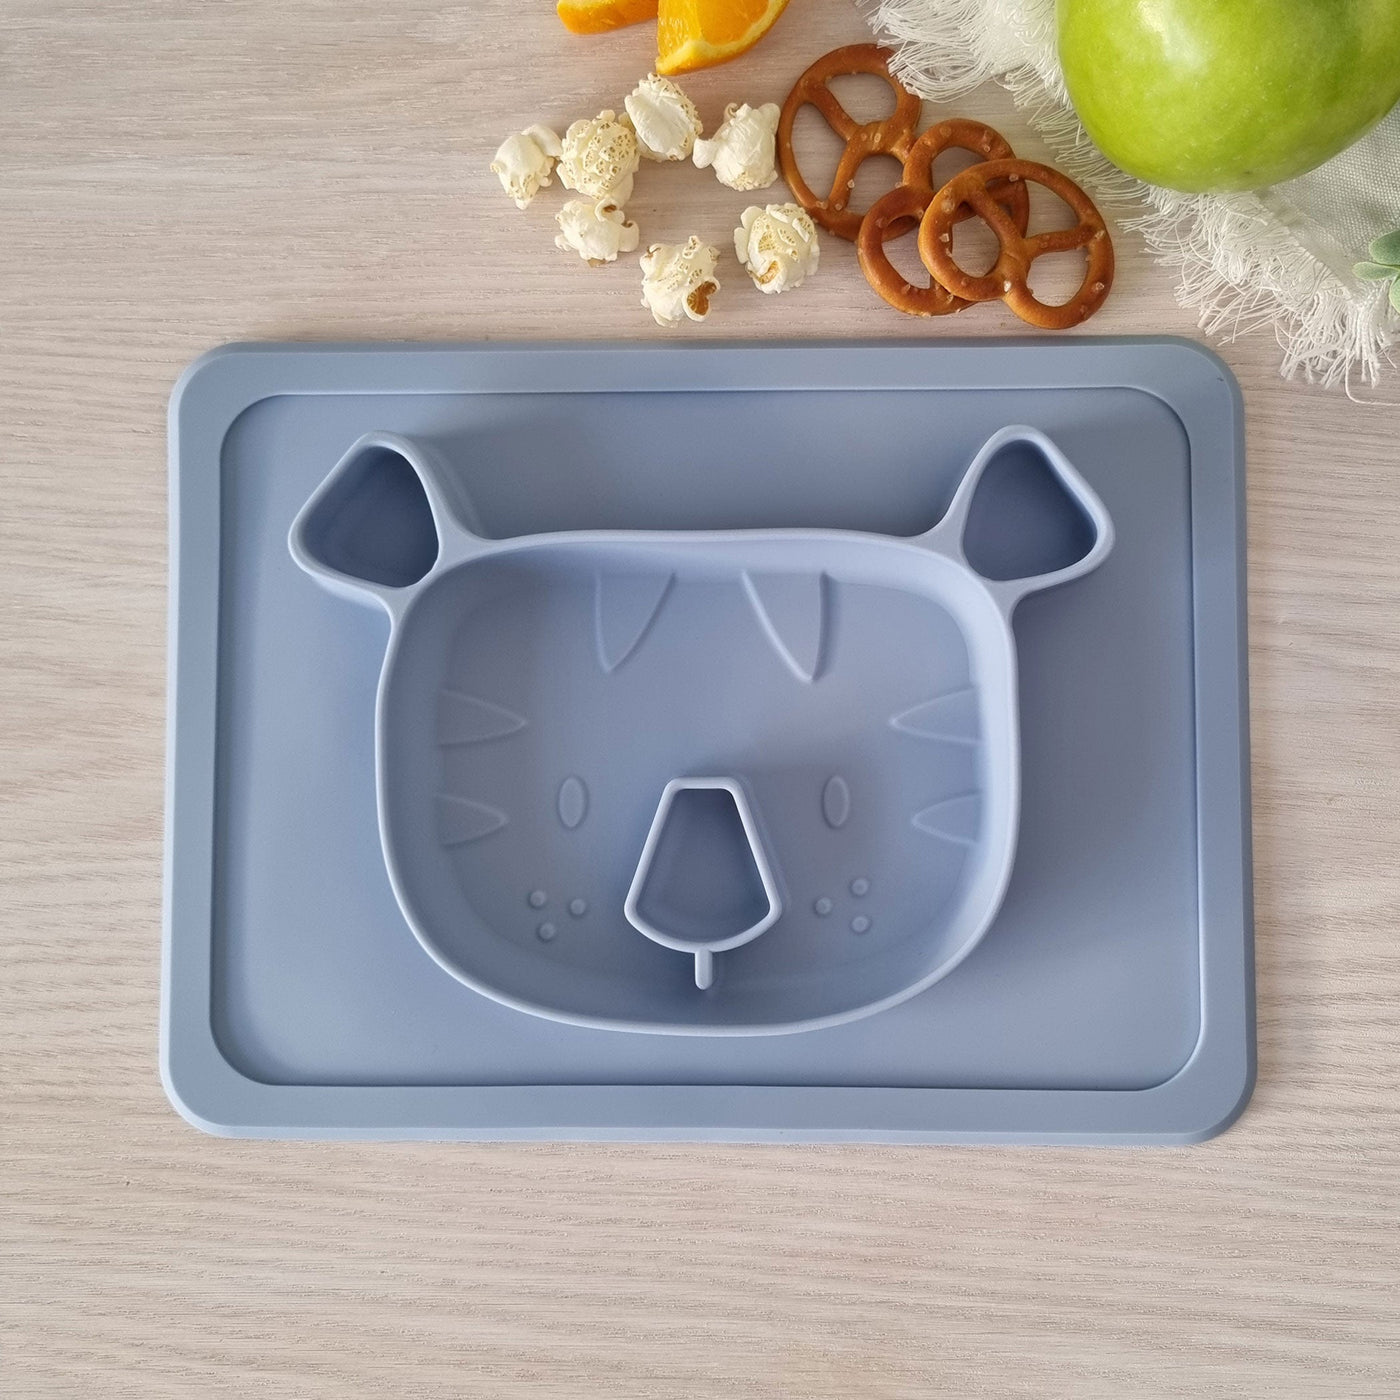 My Baby Silicone Suction Plate (Tiger) - Blue Fog